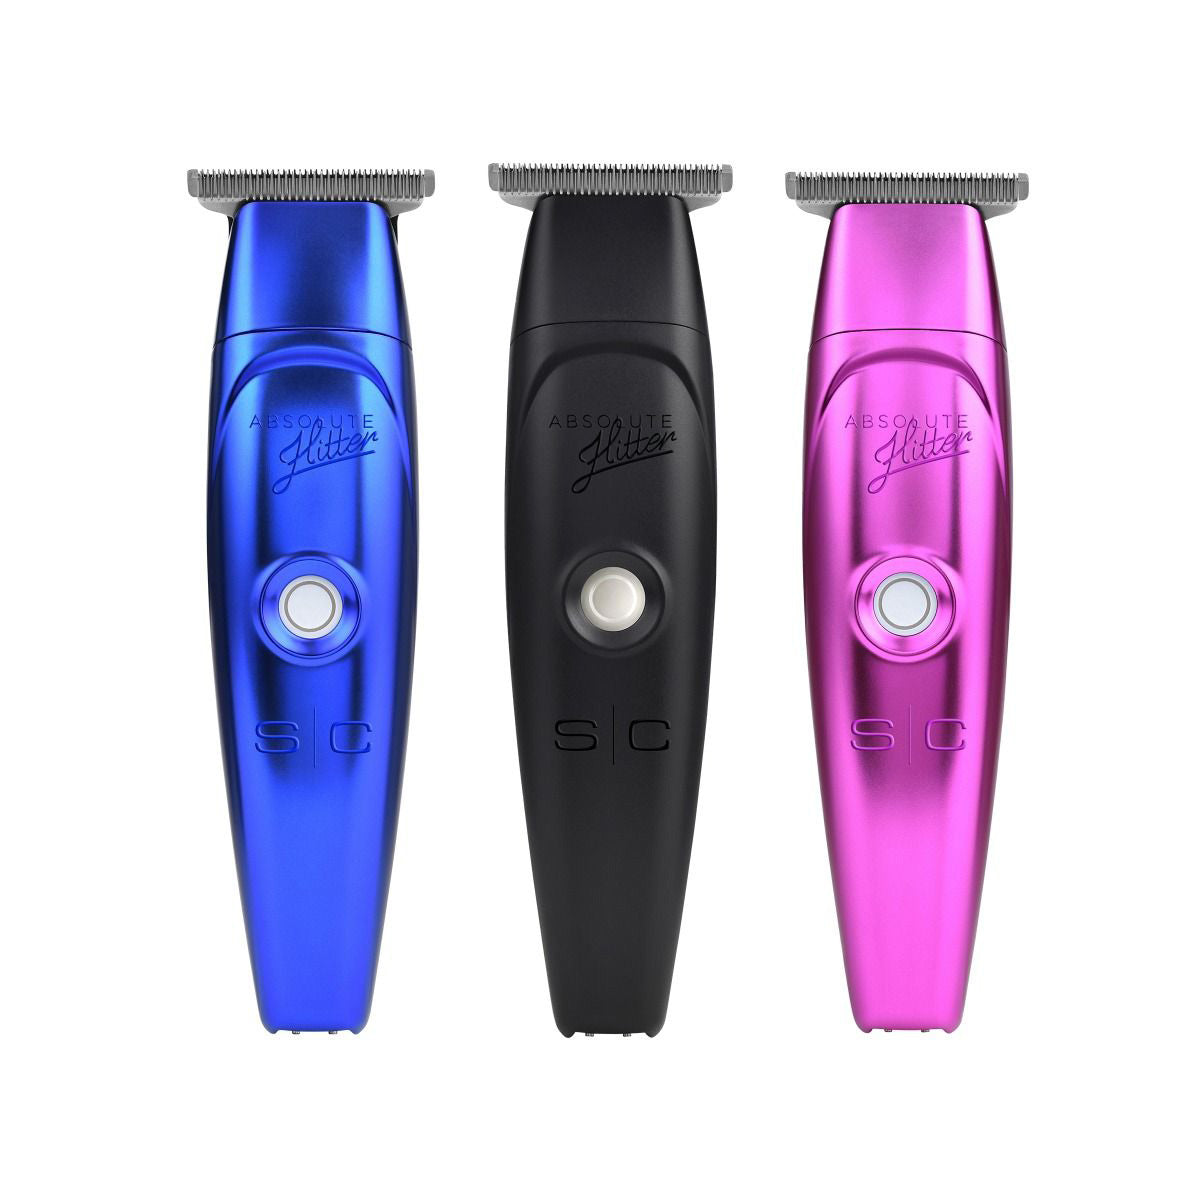 Stylecraft Absolute Hitter Professional Cordless Hair Trimmer All 3 Faceplates